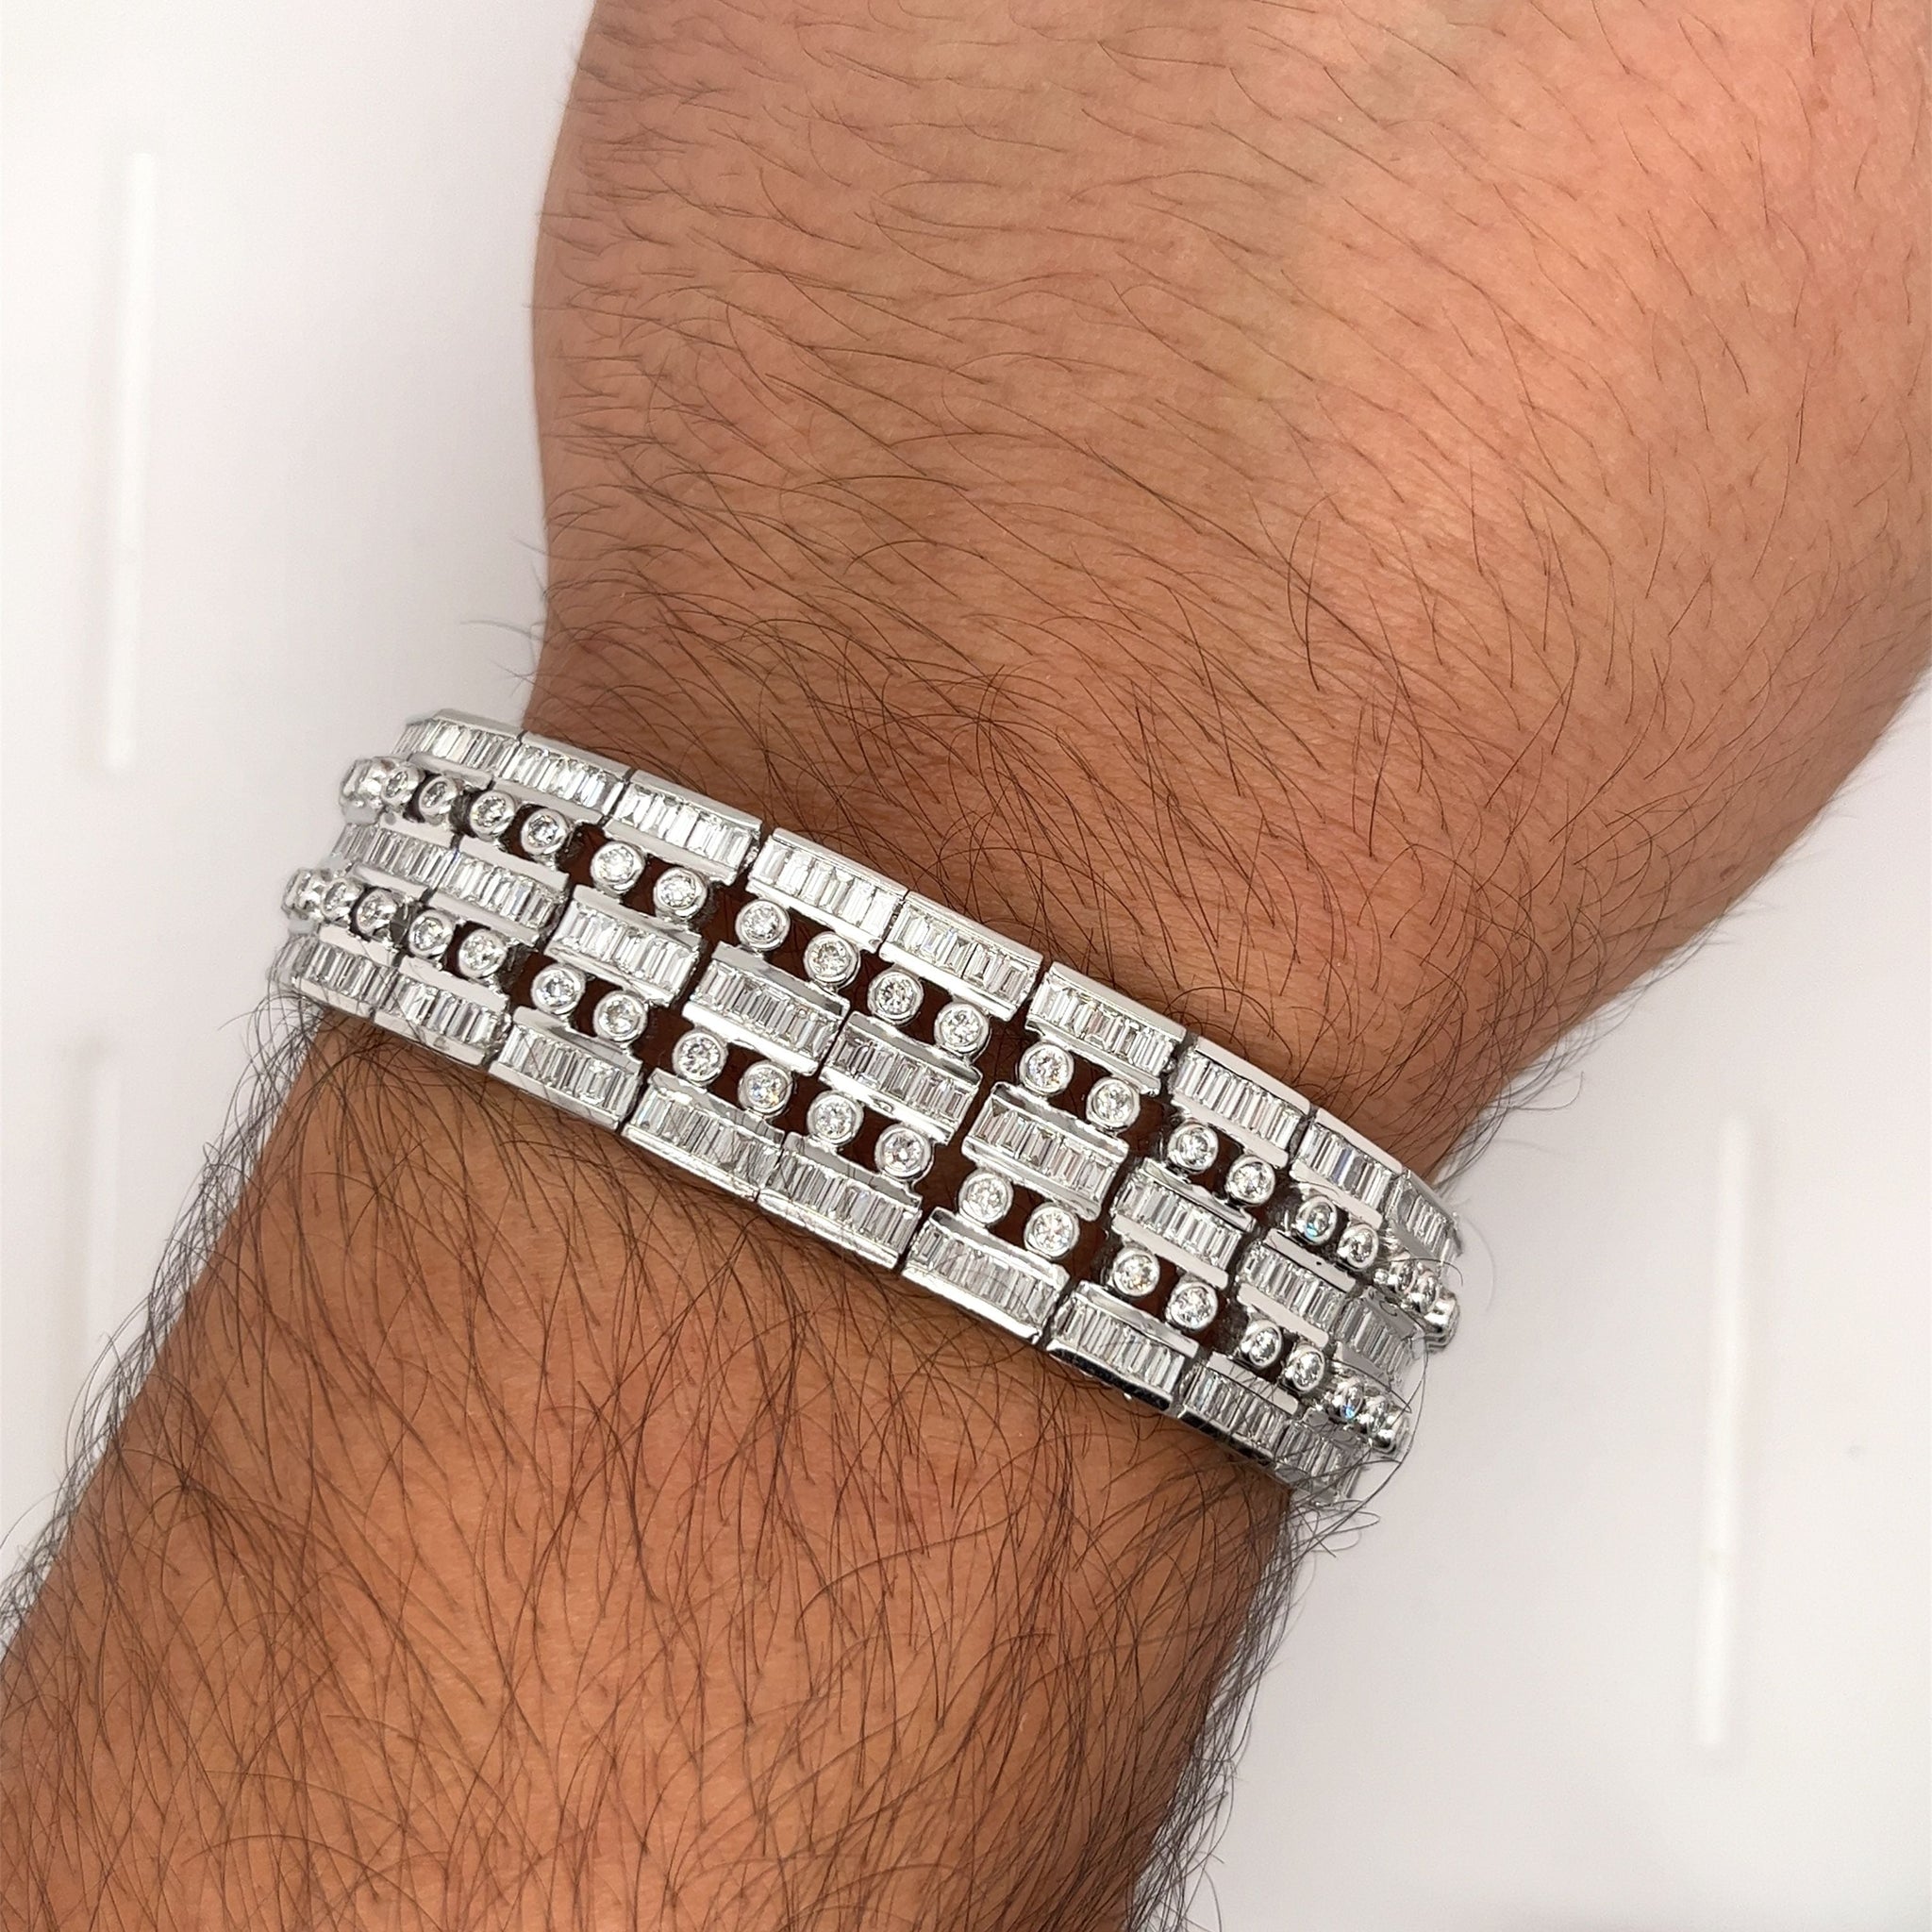 What is a Tennis Bracelet & Why is it Called Like That